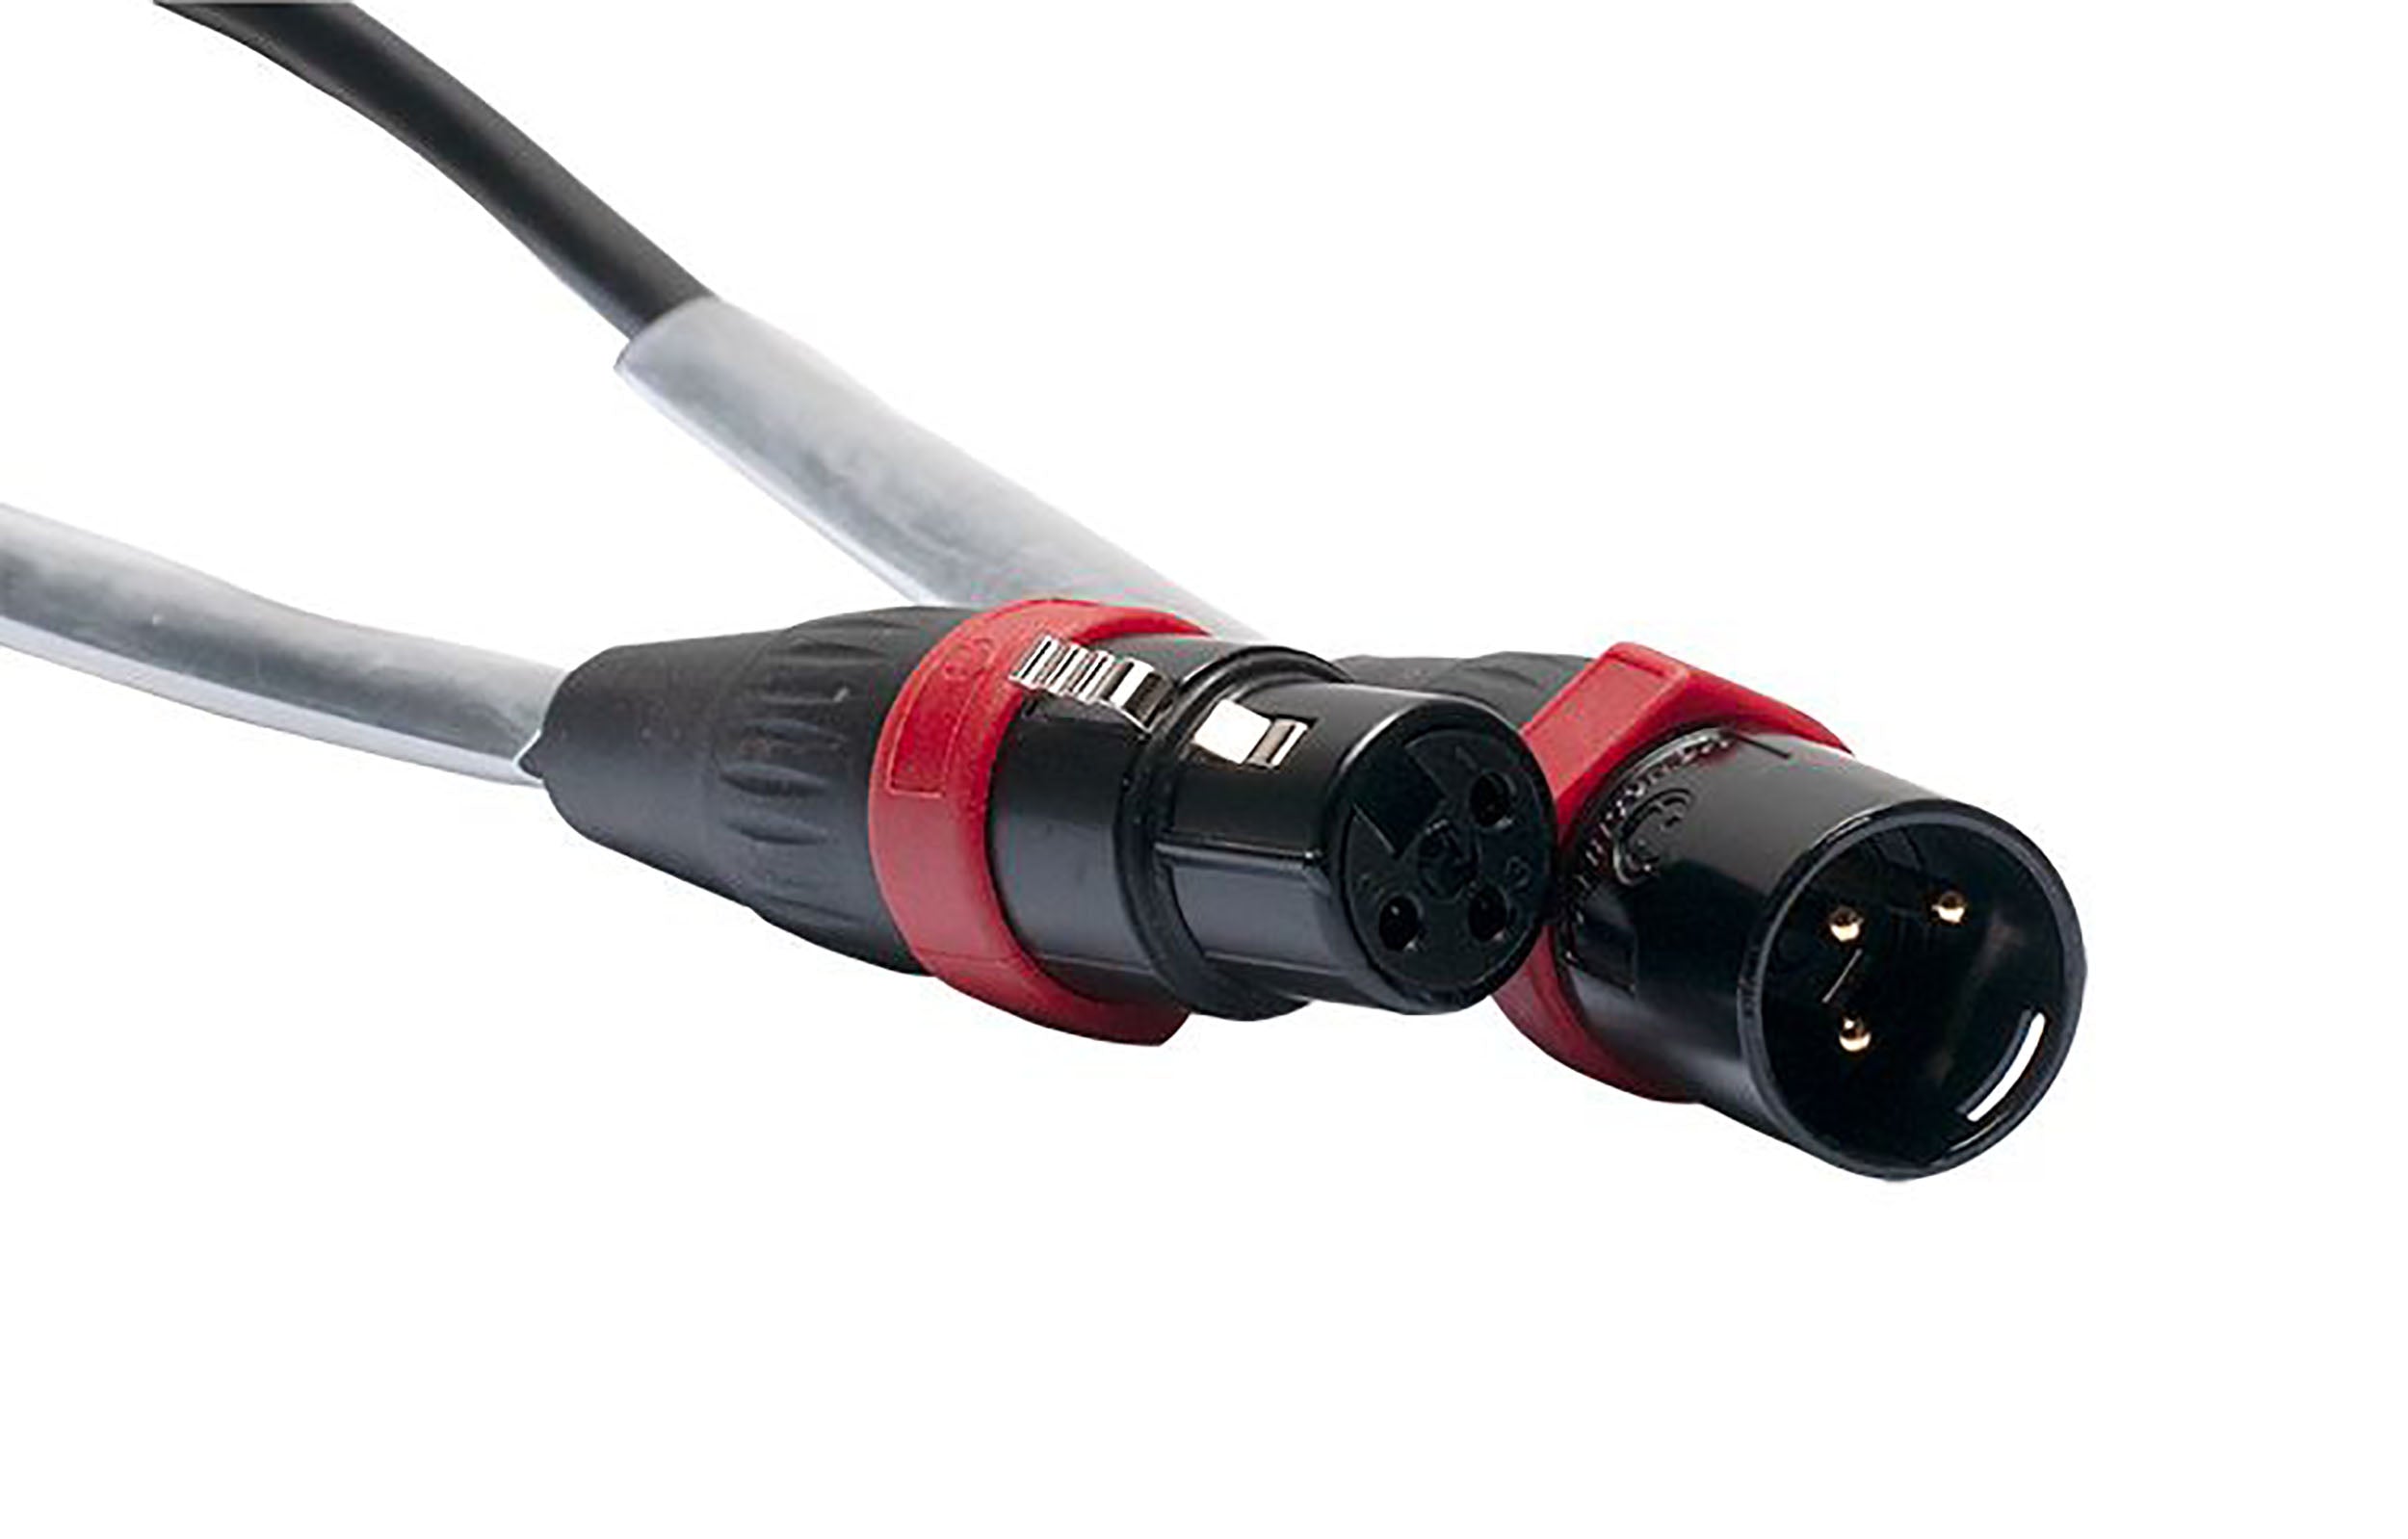 Accu-Cable AC3PDMX5PRO, Pro Series 3-Pin Male to 3-Pin Female Connection DMX Cable - 5 Ft by Accu Cable